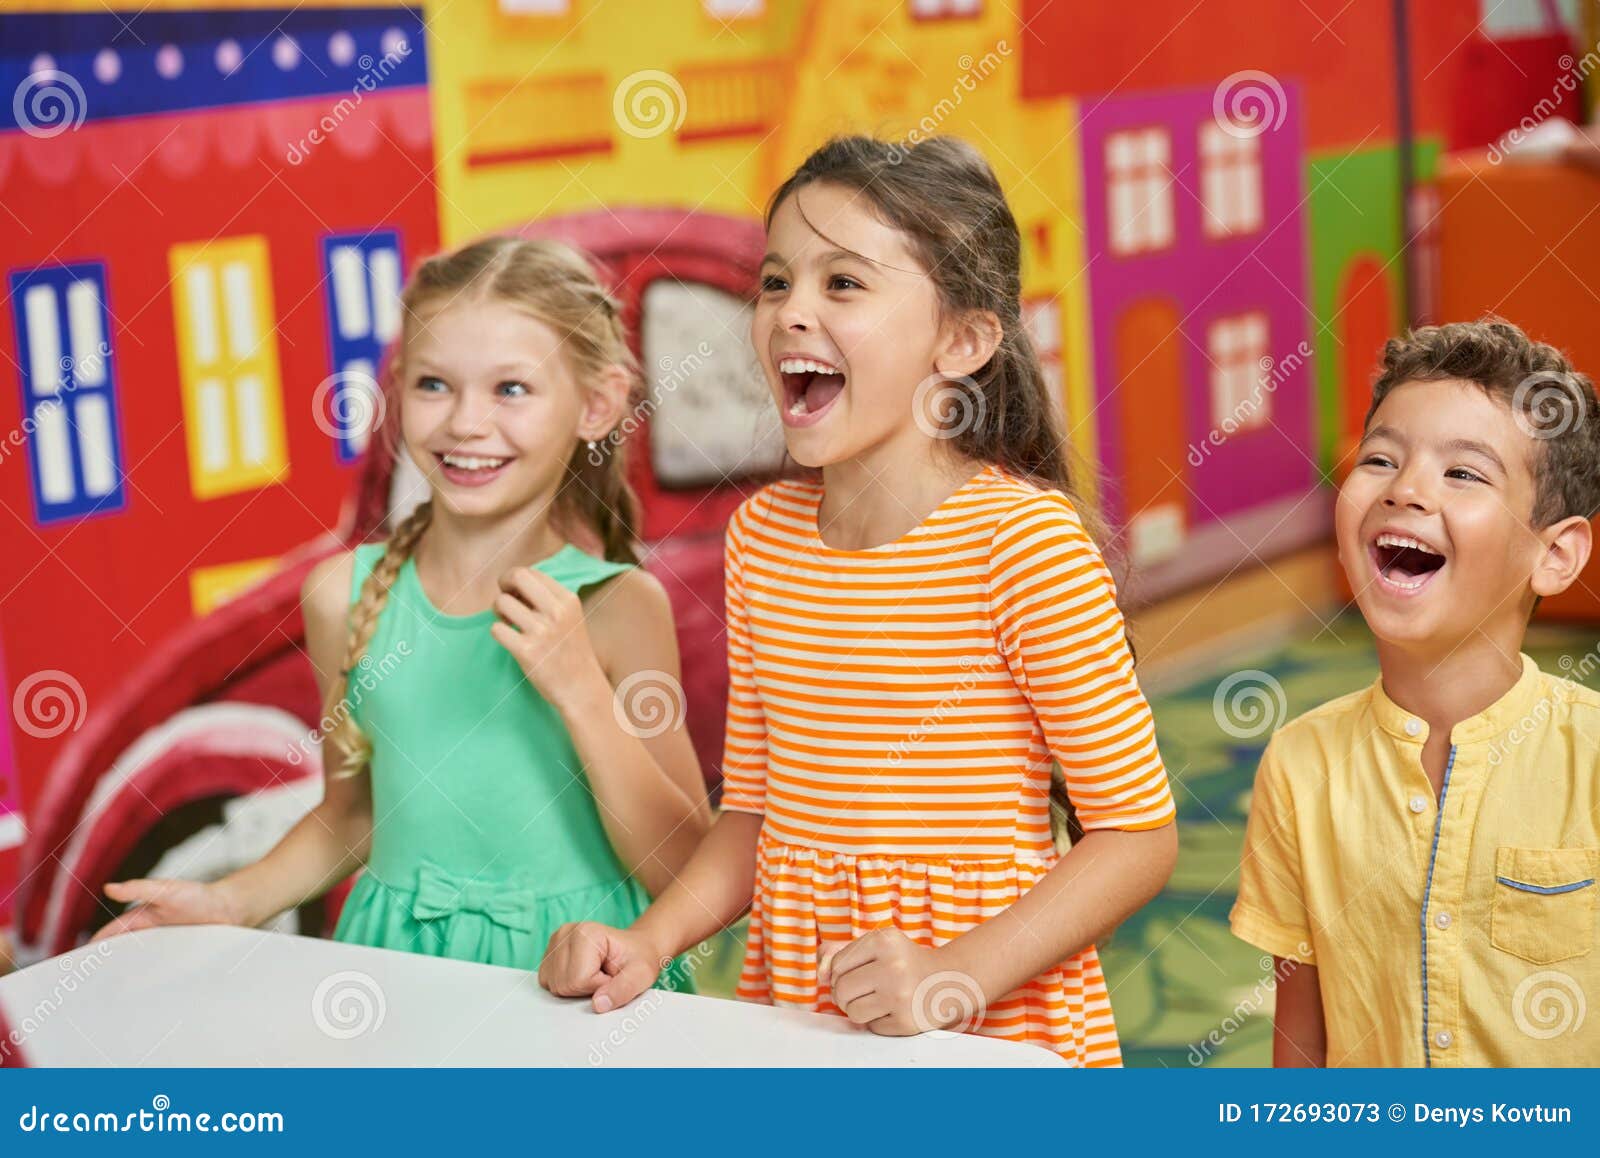 Three Excited Kids in Playroom. Stock Image - Image of club